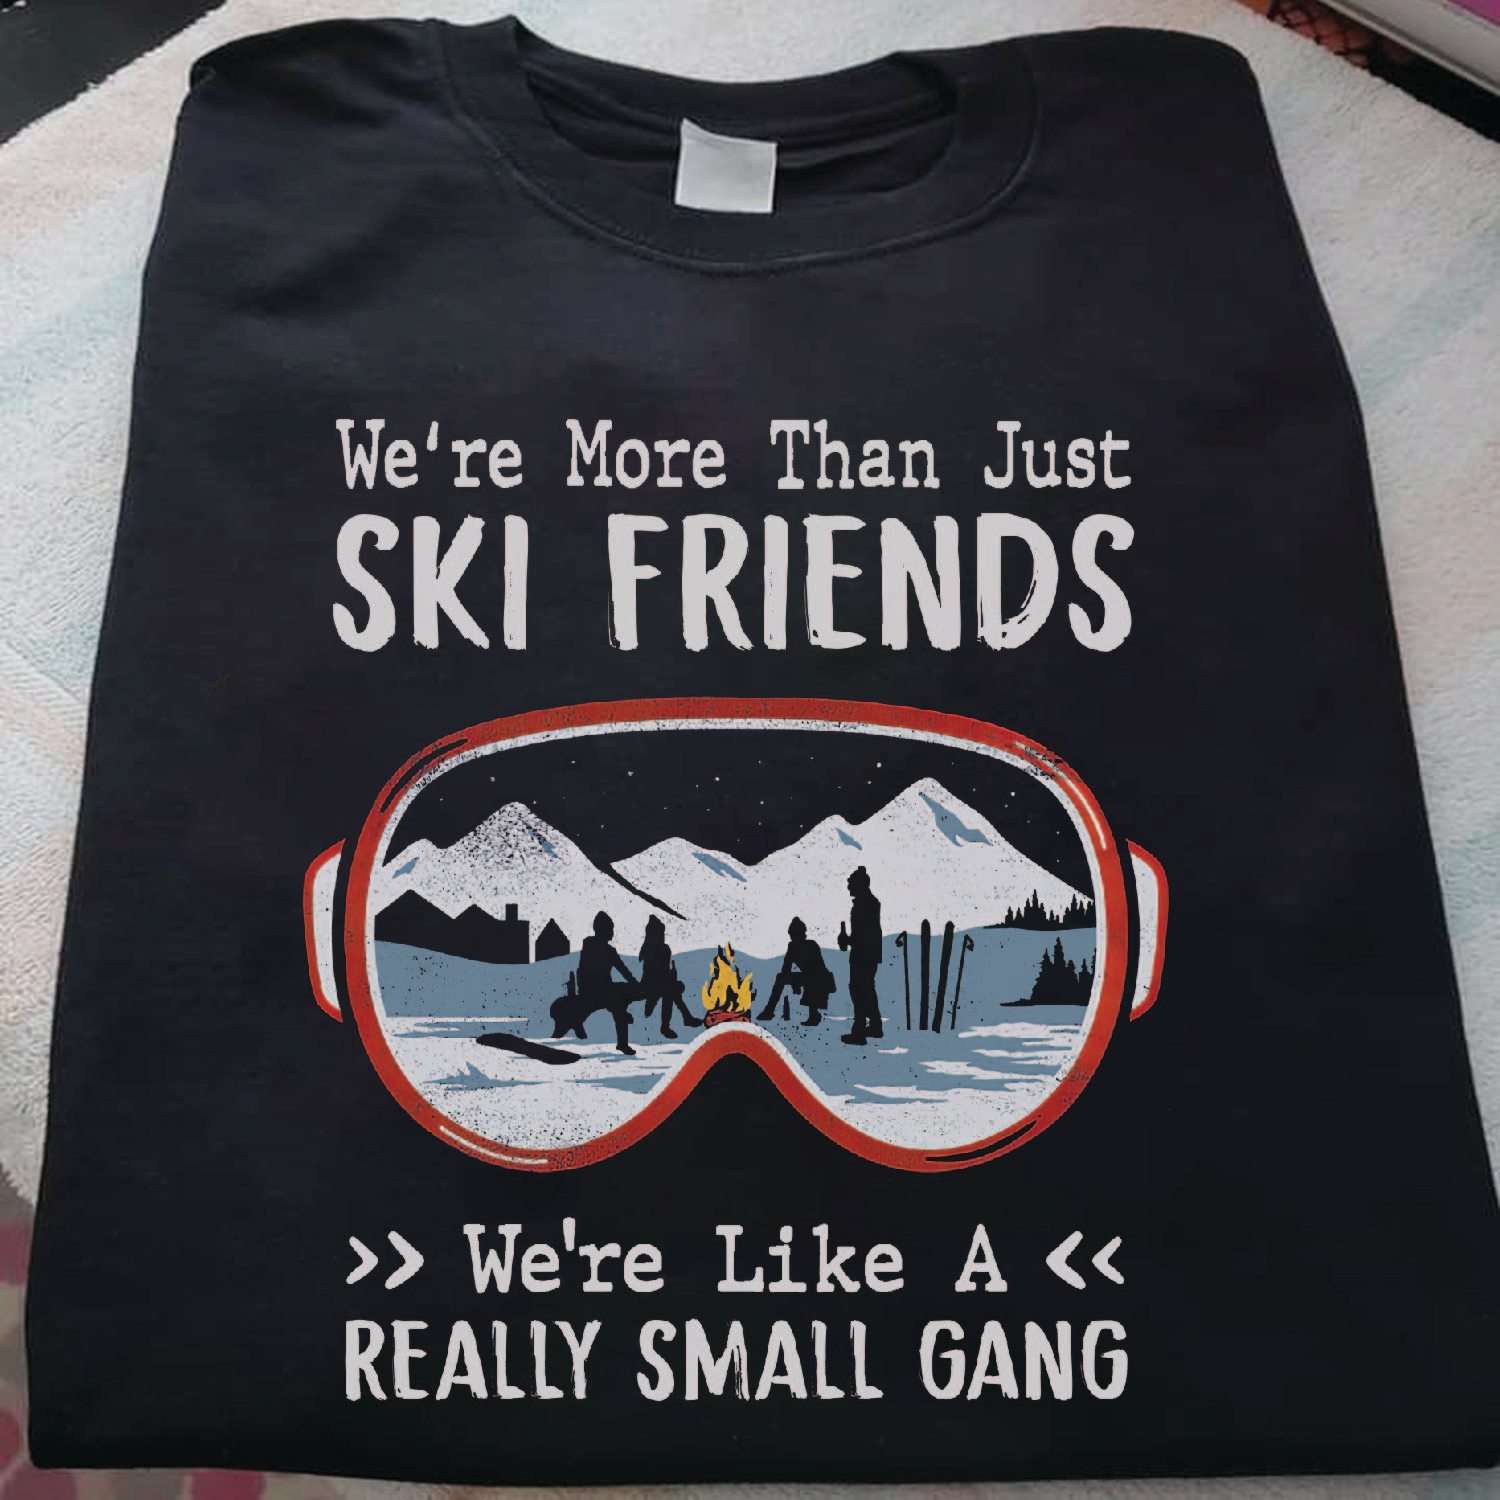 We're more than just ski friends, we're like a really small gang - Skiing team